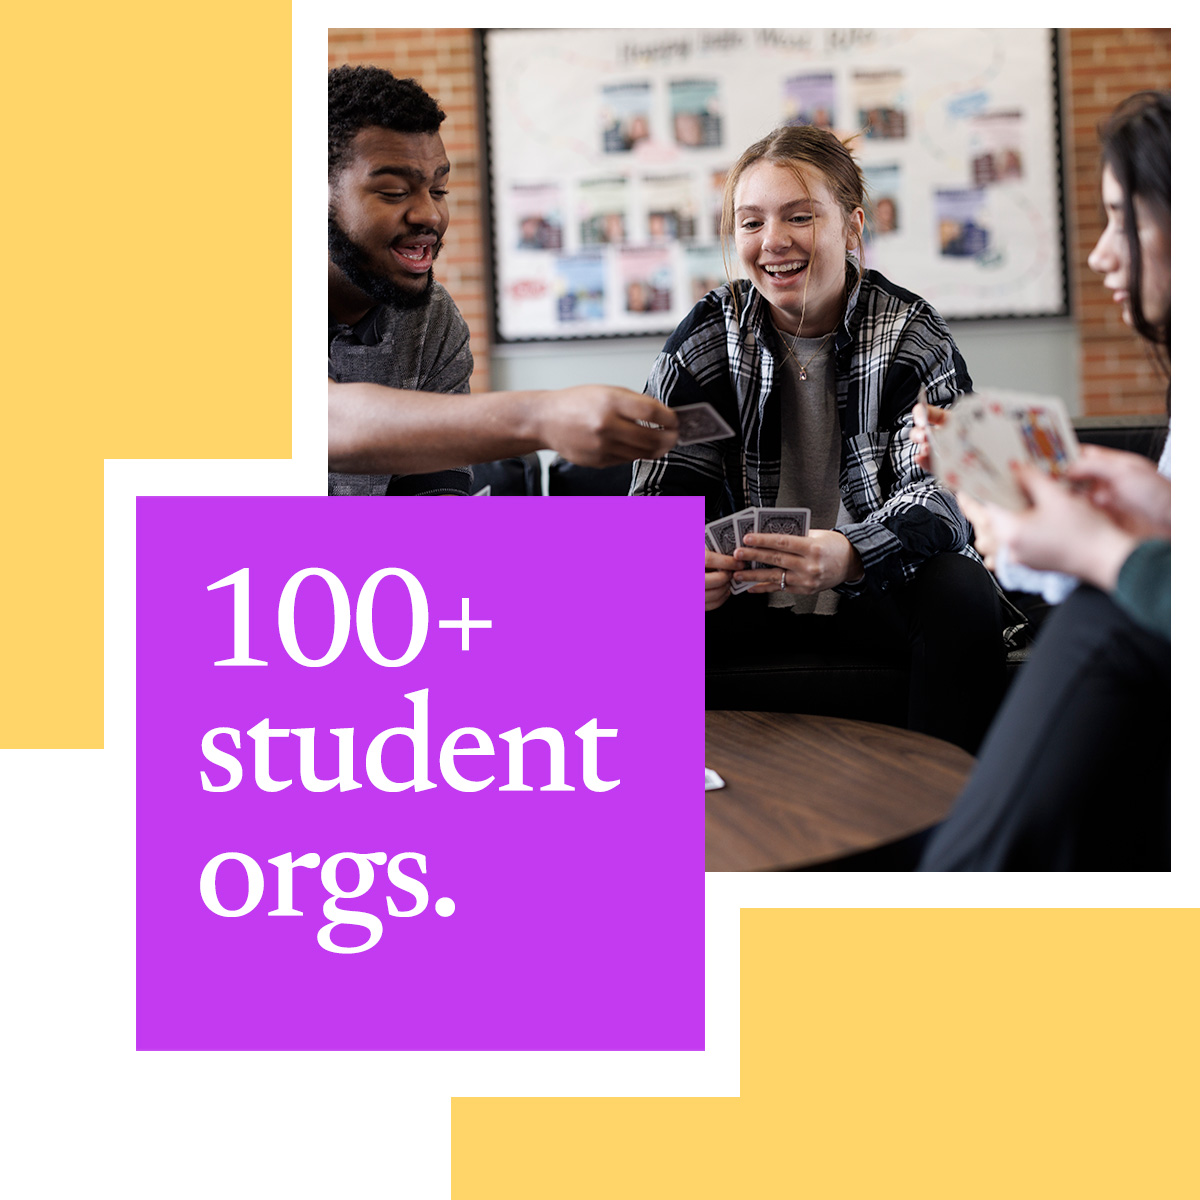 100+ student orgs